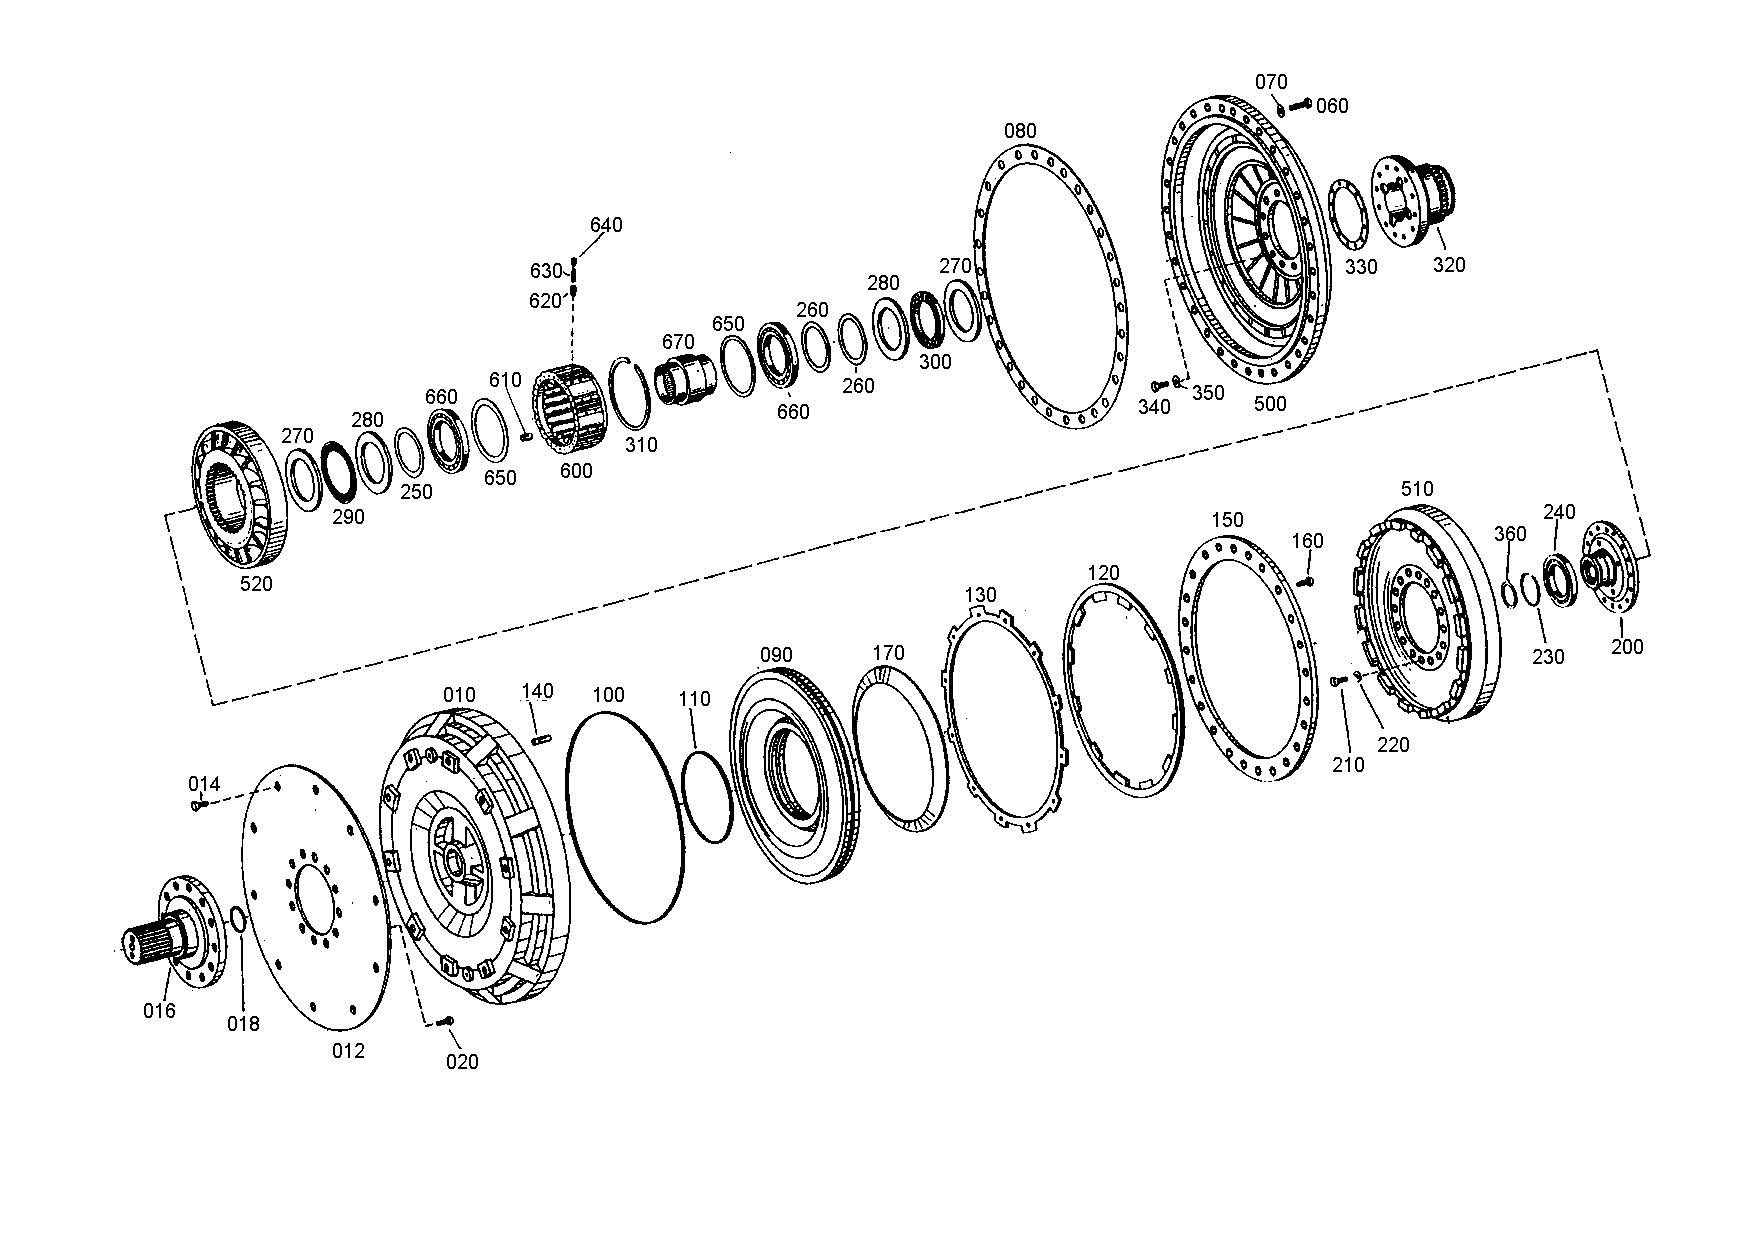 drawing for Manitowoc Crane Group Germany 03329243 - OUTPUT SHAFT (figure 5)